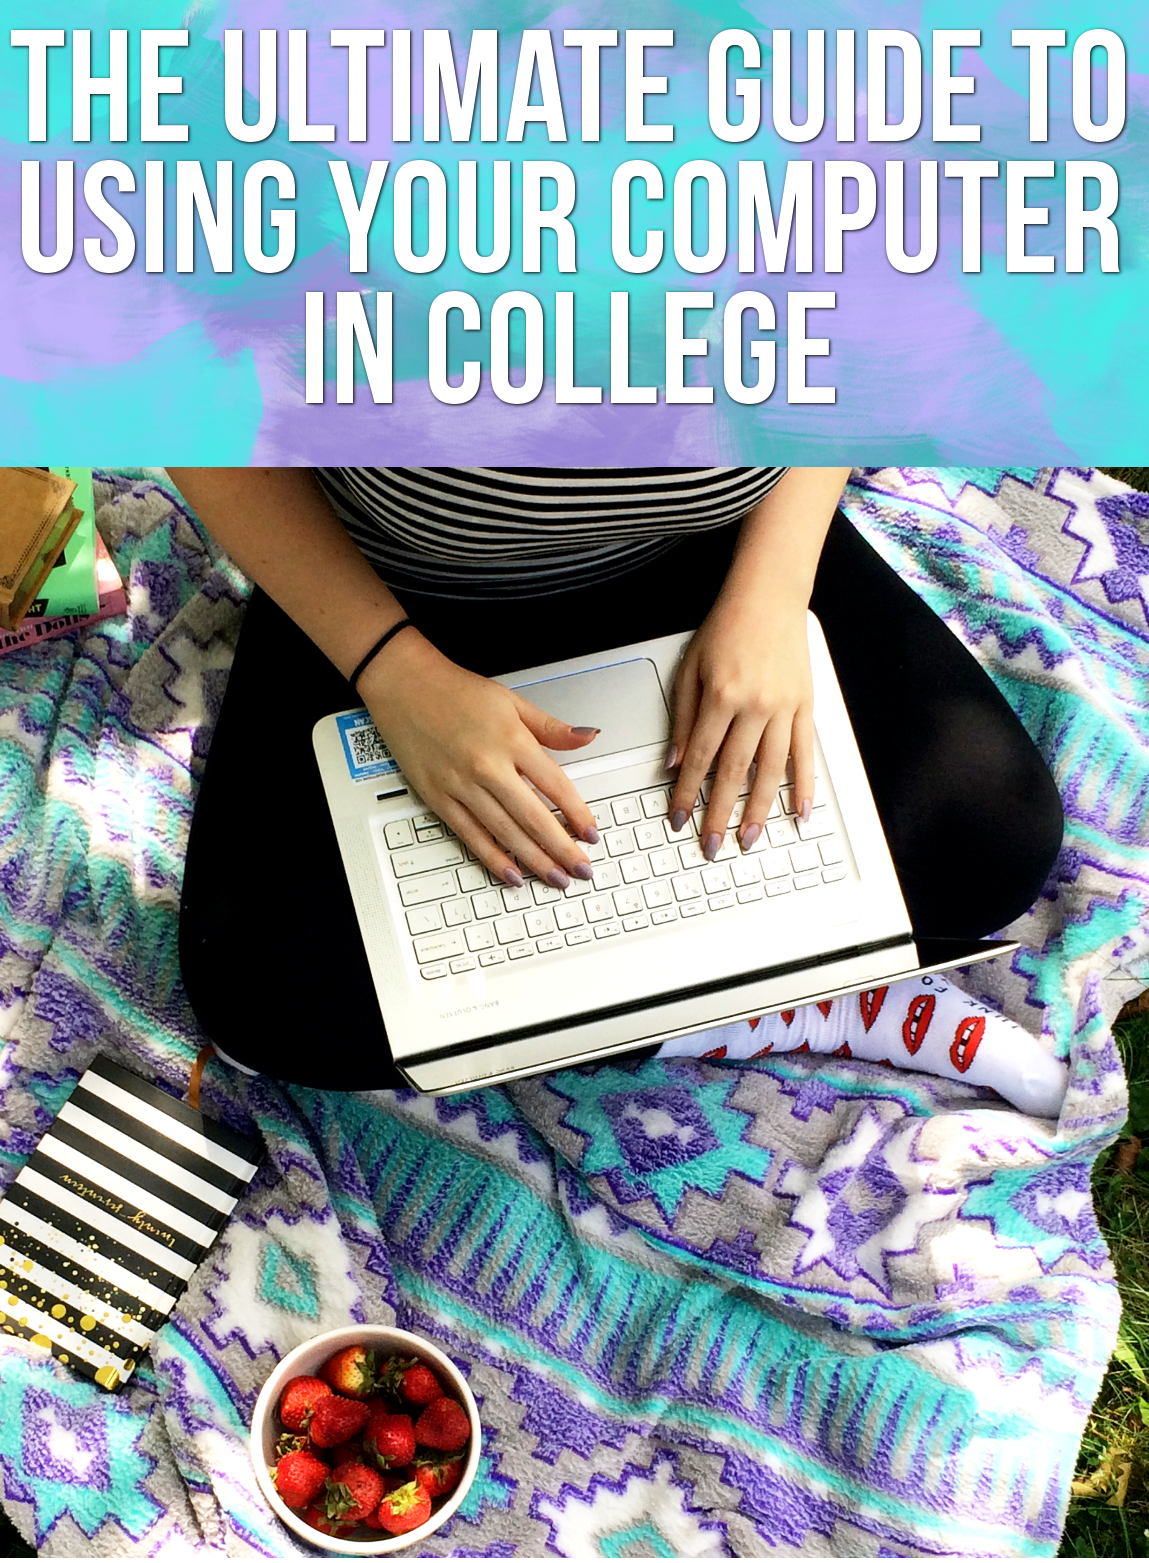 The Ultimate Guide to Using your Computer in College